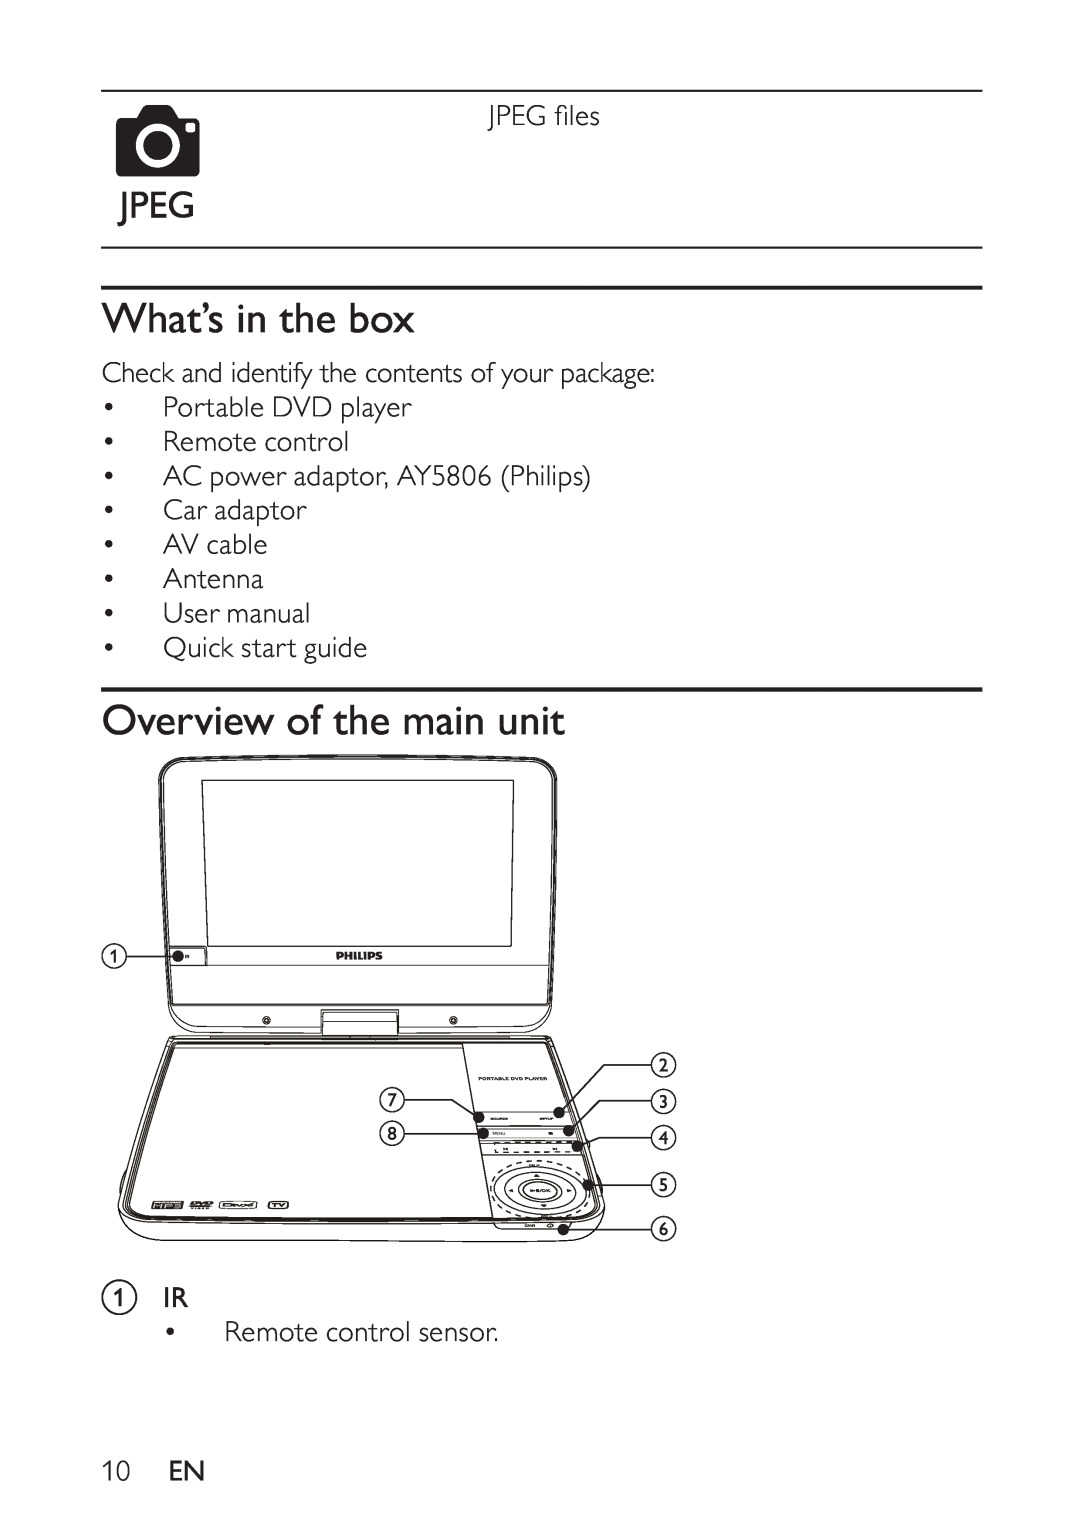 Philips PET748 What’s in the box, Overview of the main unit, JPEG ﬁ les, Antenna User manual Quick start guide, 10 EN 